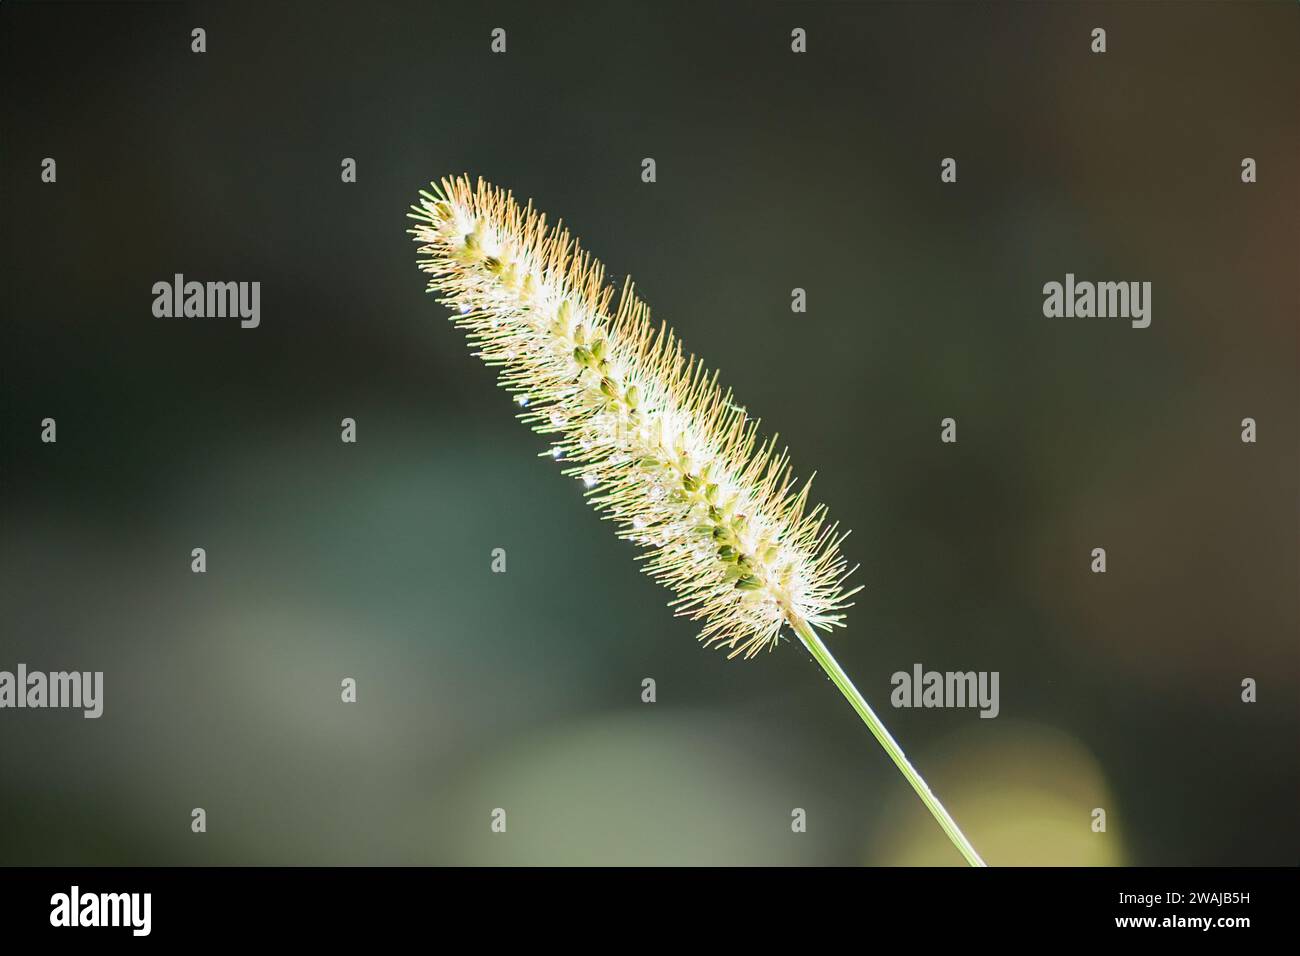 A tranquil close-up shot of a delicate foxtail grass spikelet, beautifully backlit by soft, natural light Stock Photo